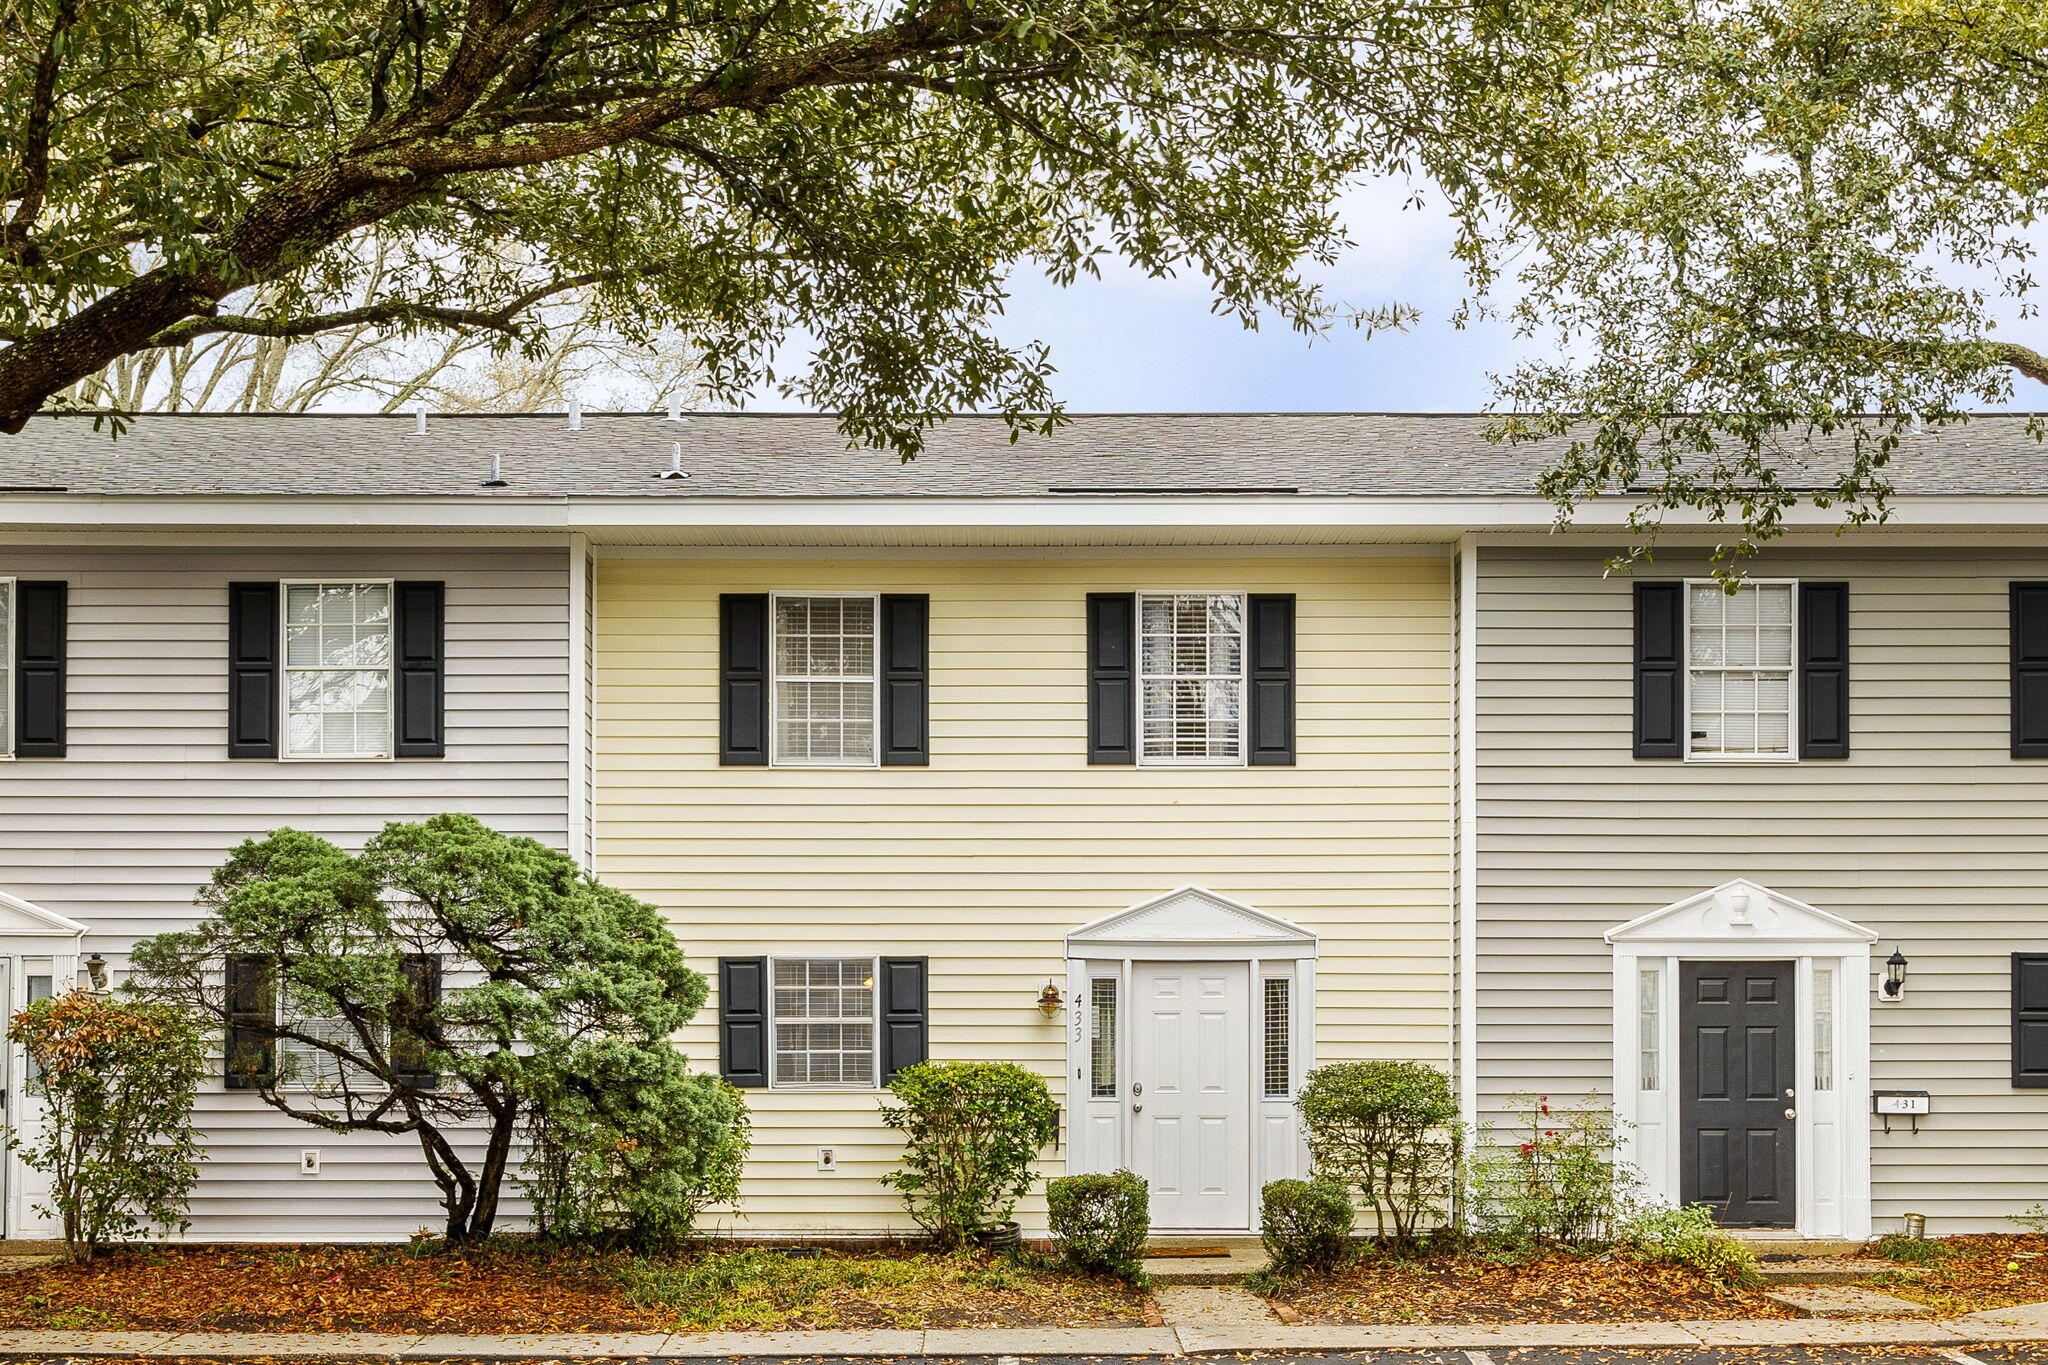 View Mount Pleasant, SC 29464 townhome